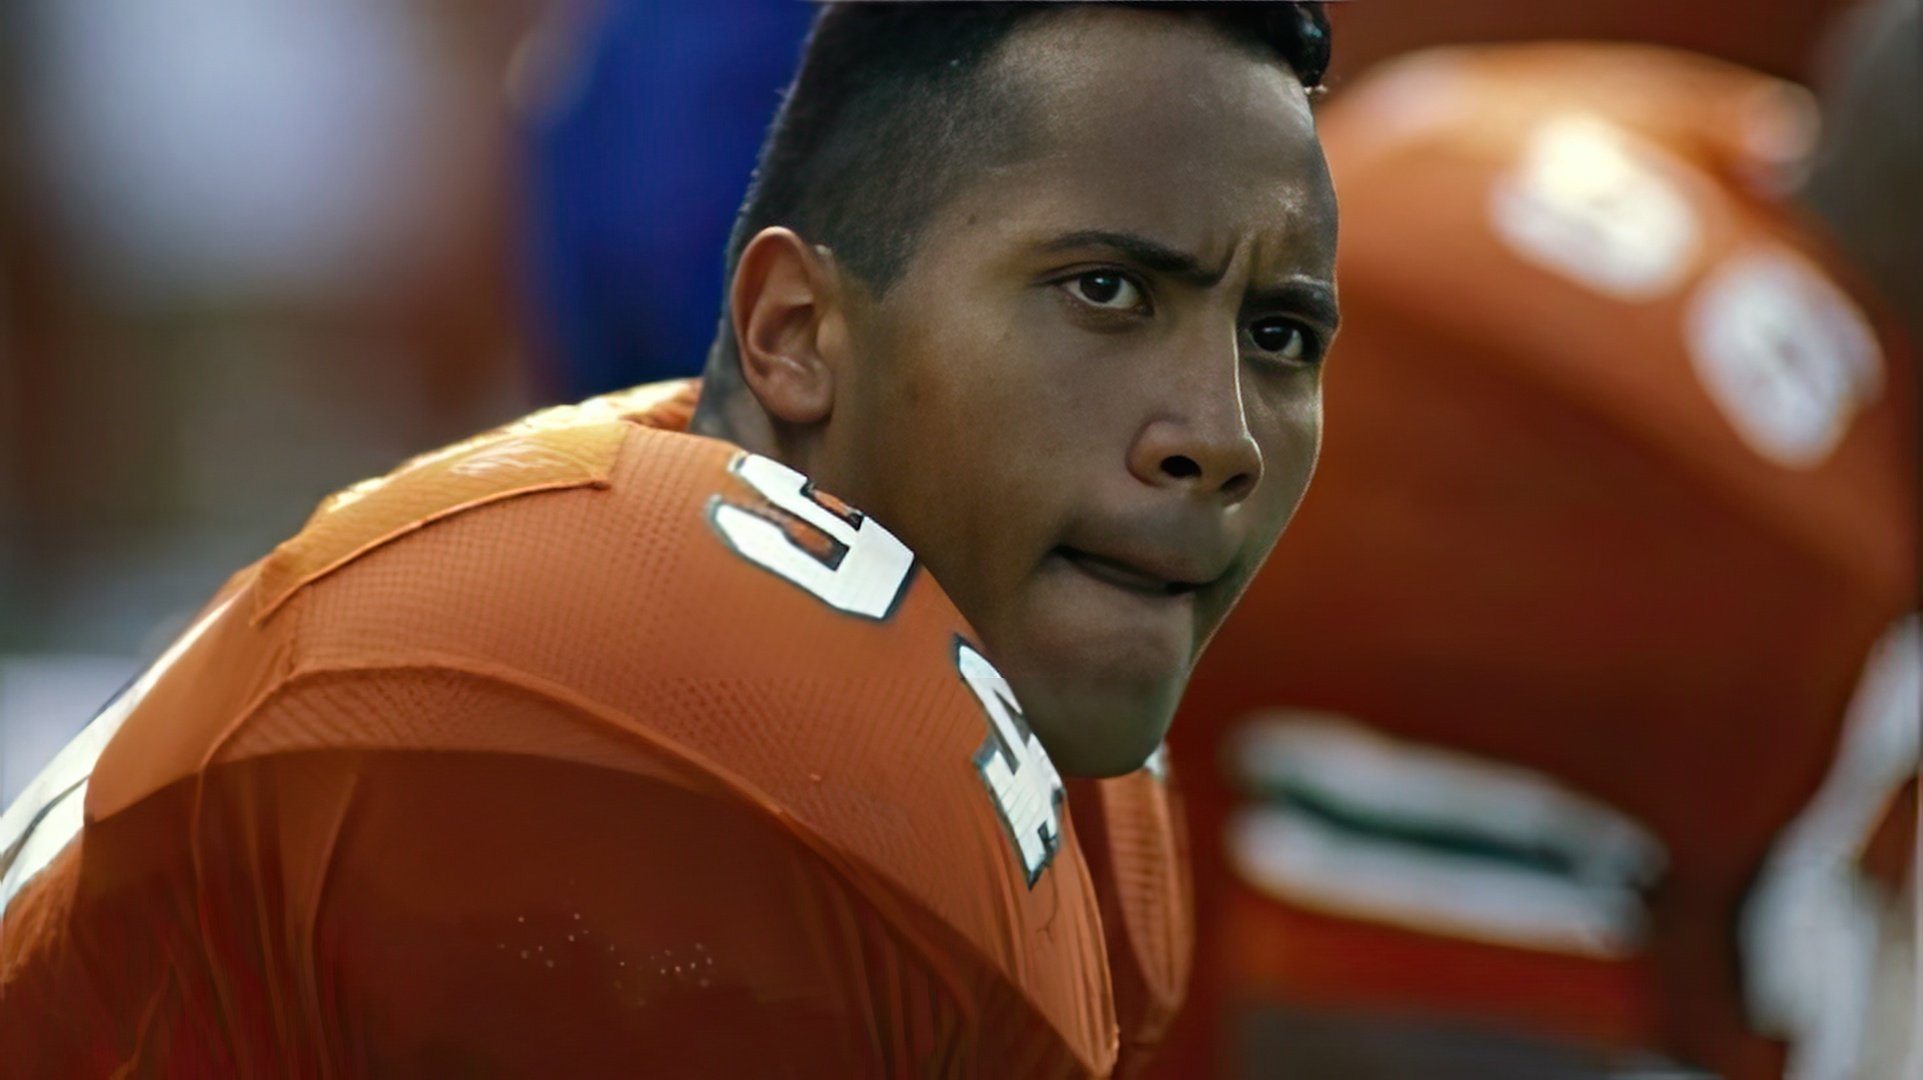 In his youth, Dwayne Johnson played football at a professional level